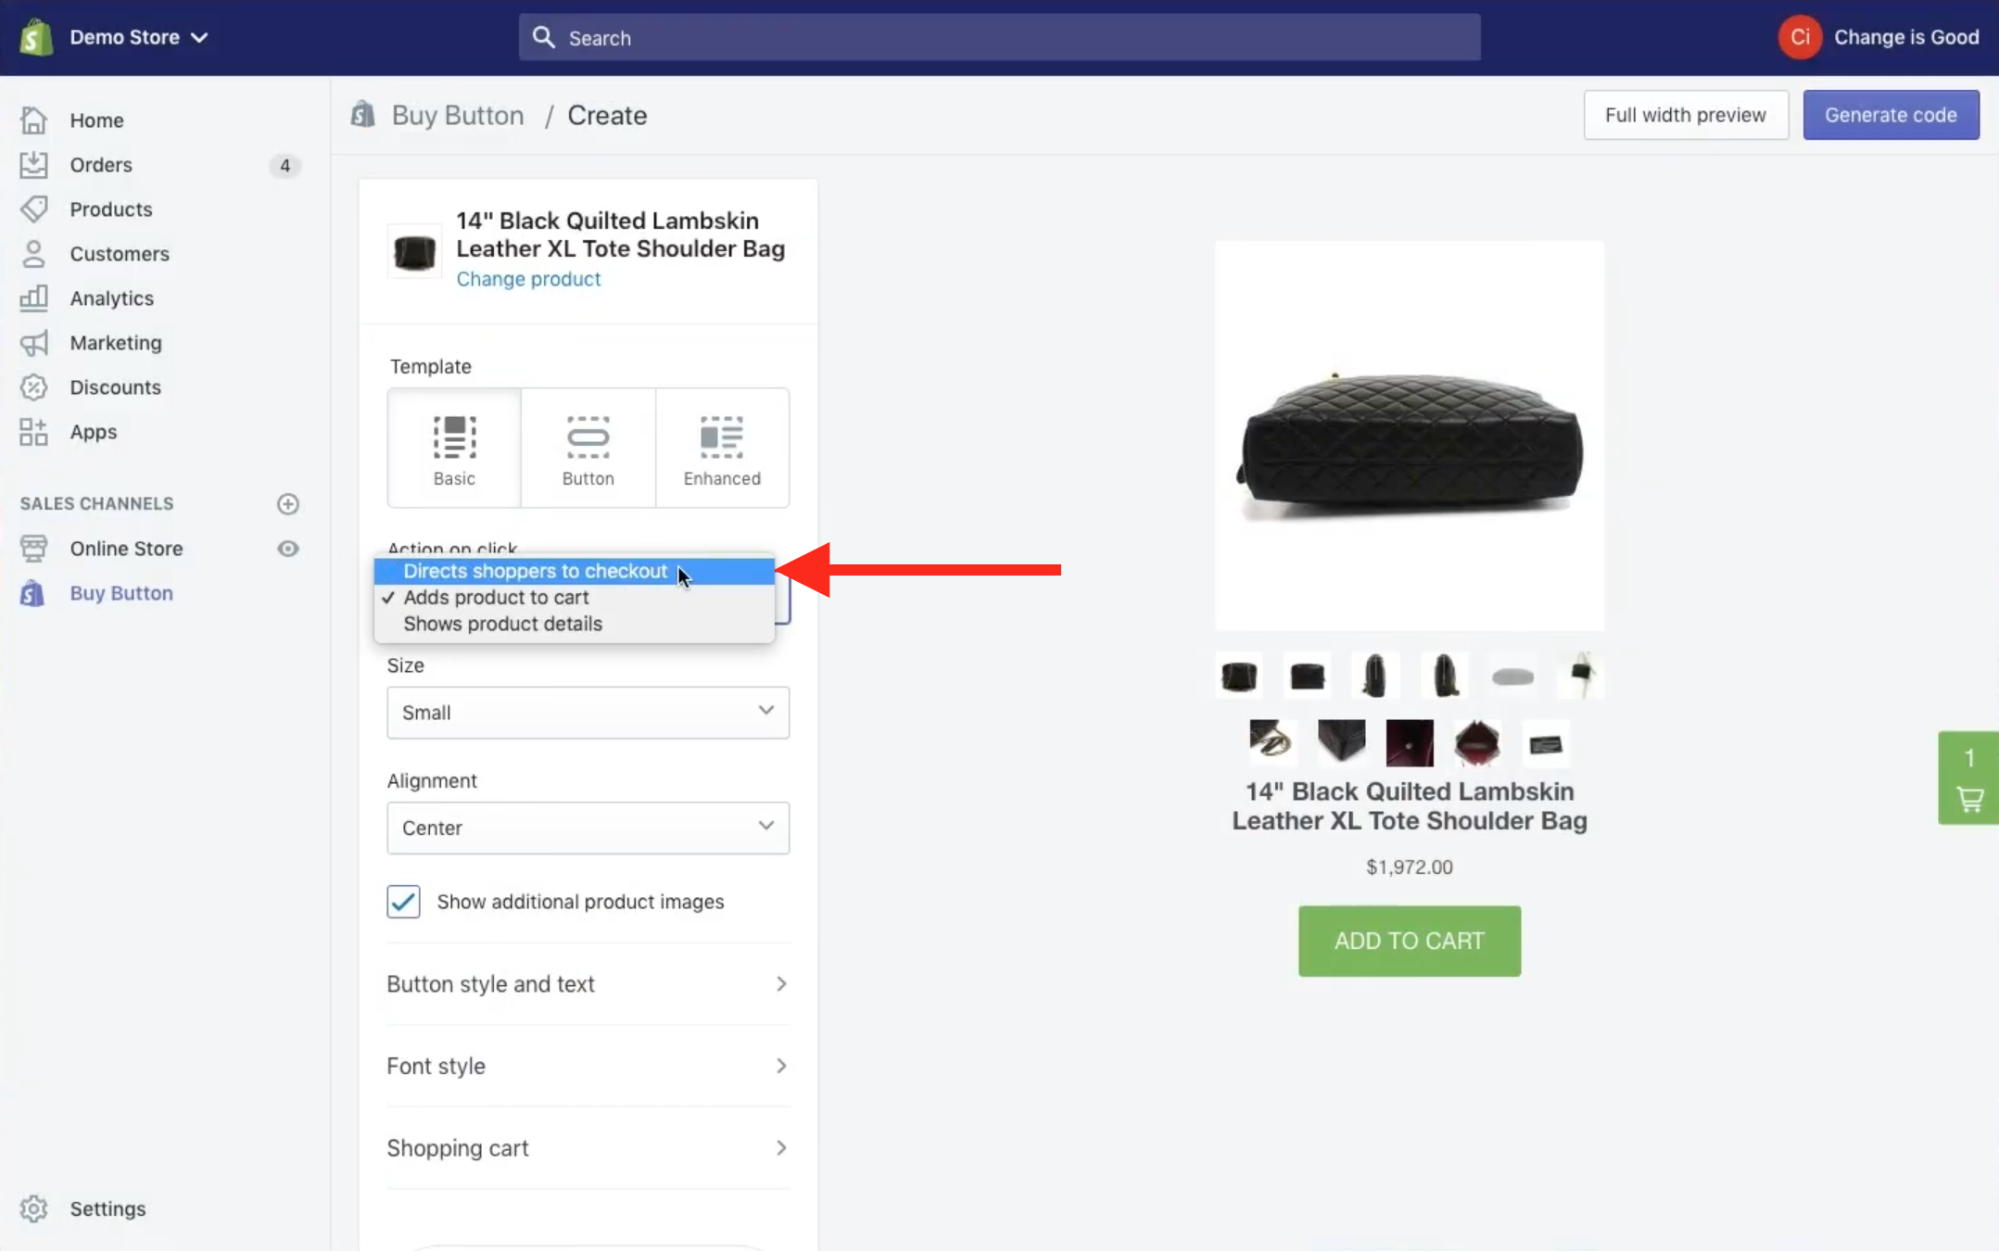 A better user experience when using Wix is to make the Shopify Buy Button direct shoppers to checkout when generating the Shopify code.